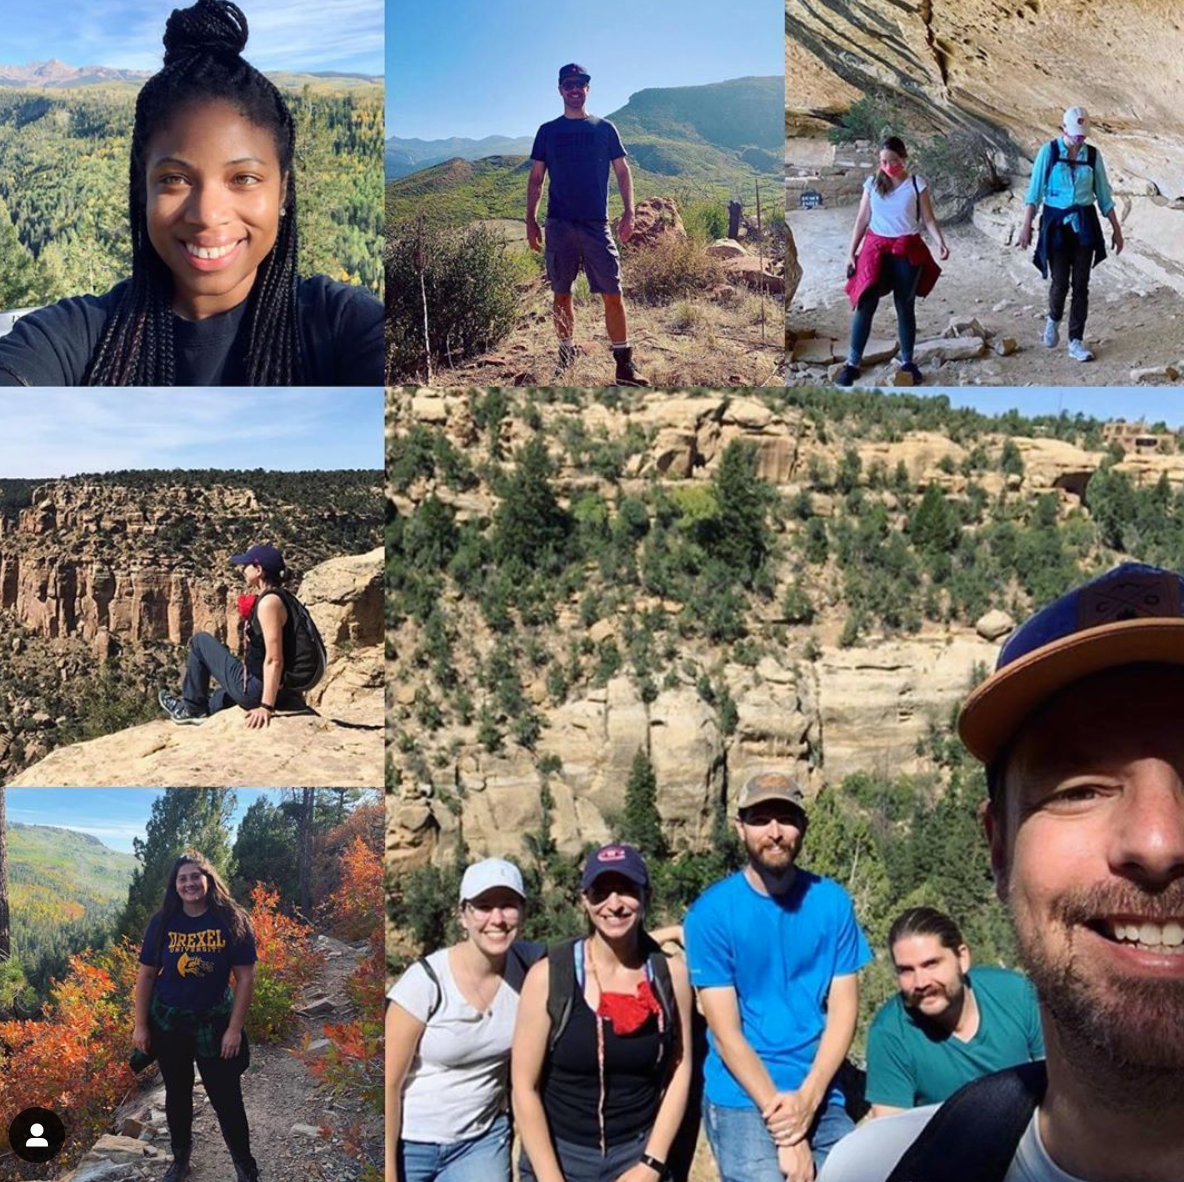  Our cast &amp; crew have been taking full advantage of all the sights Colorado has to offer! @OperaLafayette 